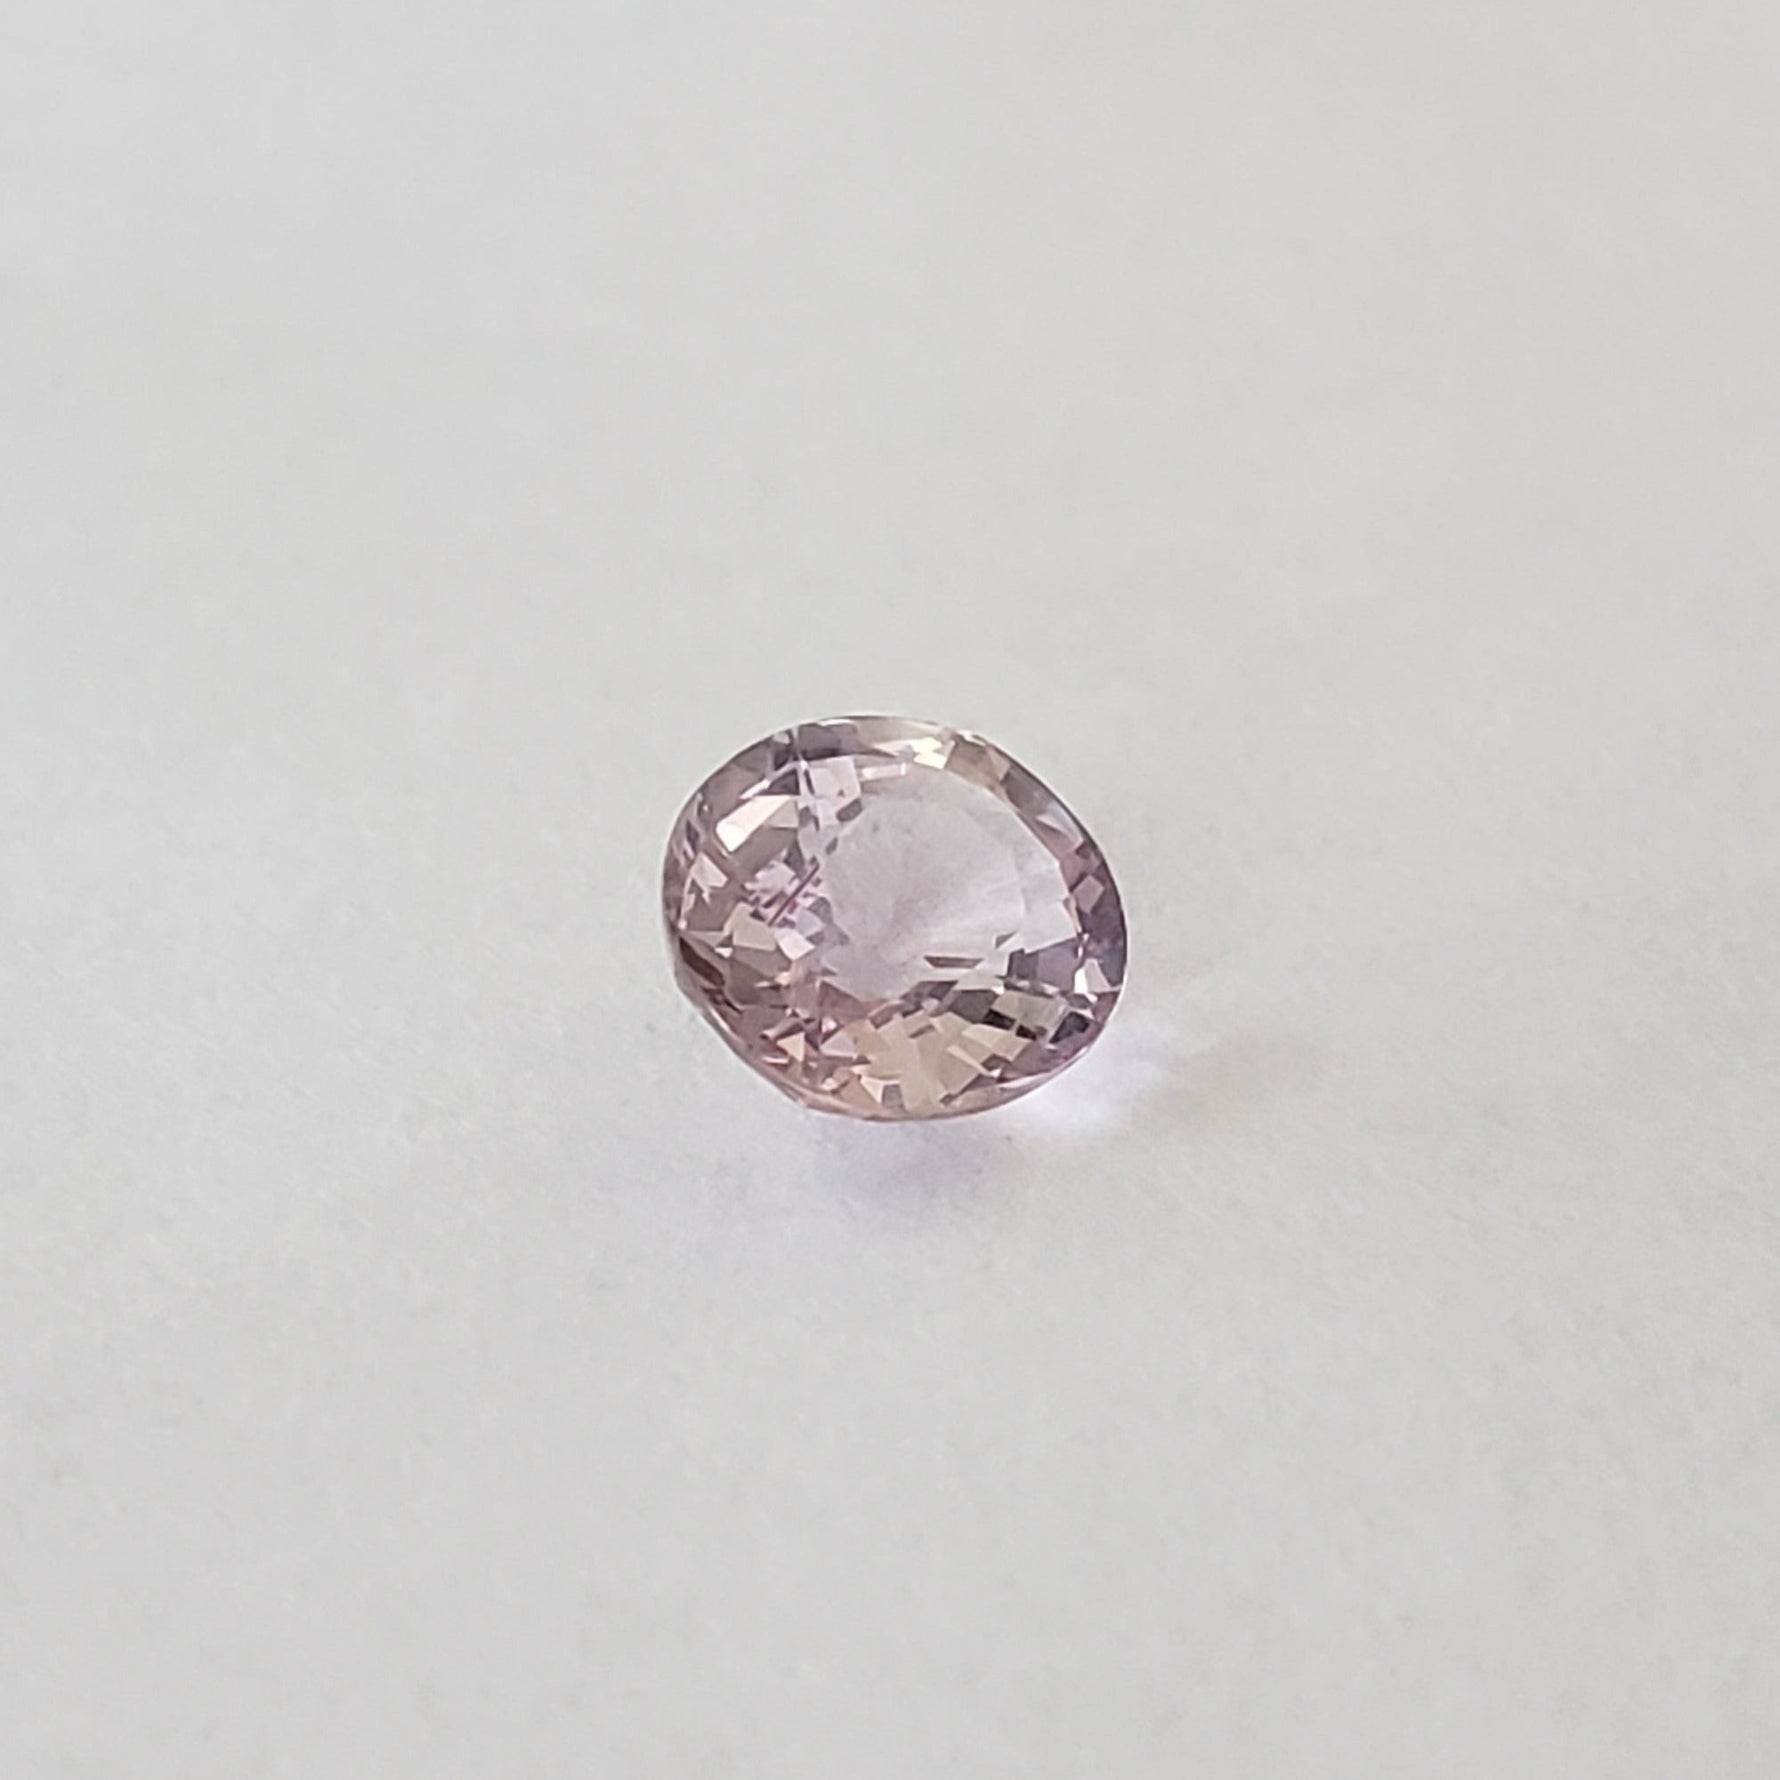 Spinel | Oval Cut | Purple Pink | Natural | 6.5x5.5mm | Myanmar